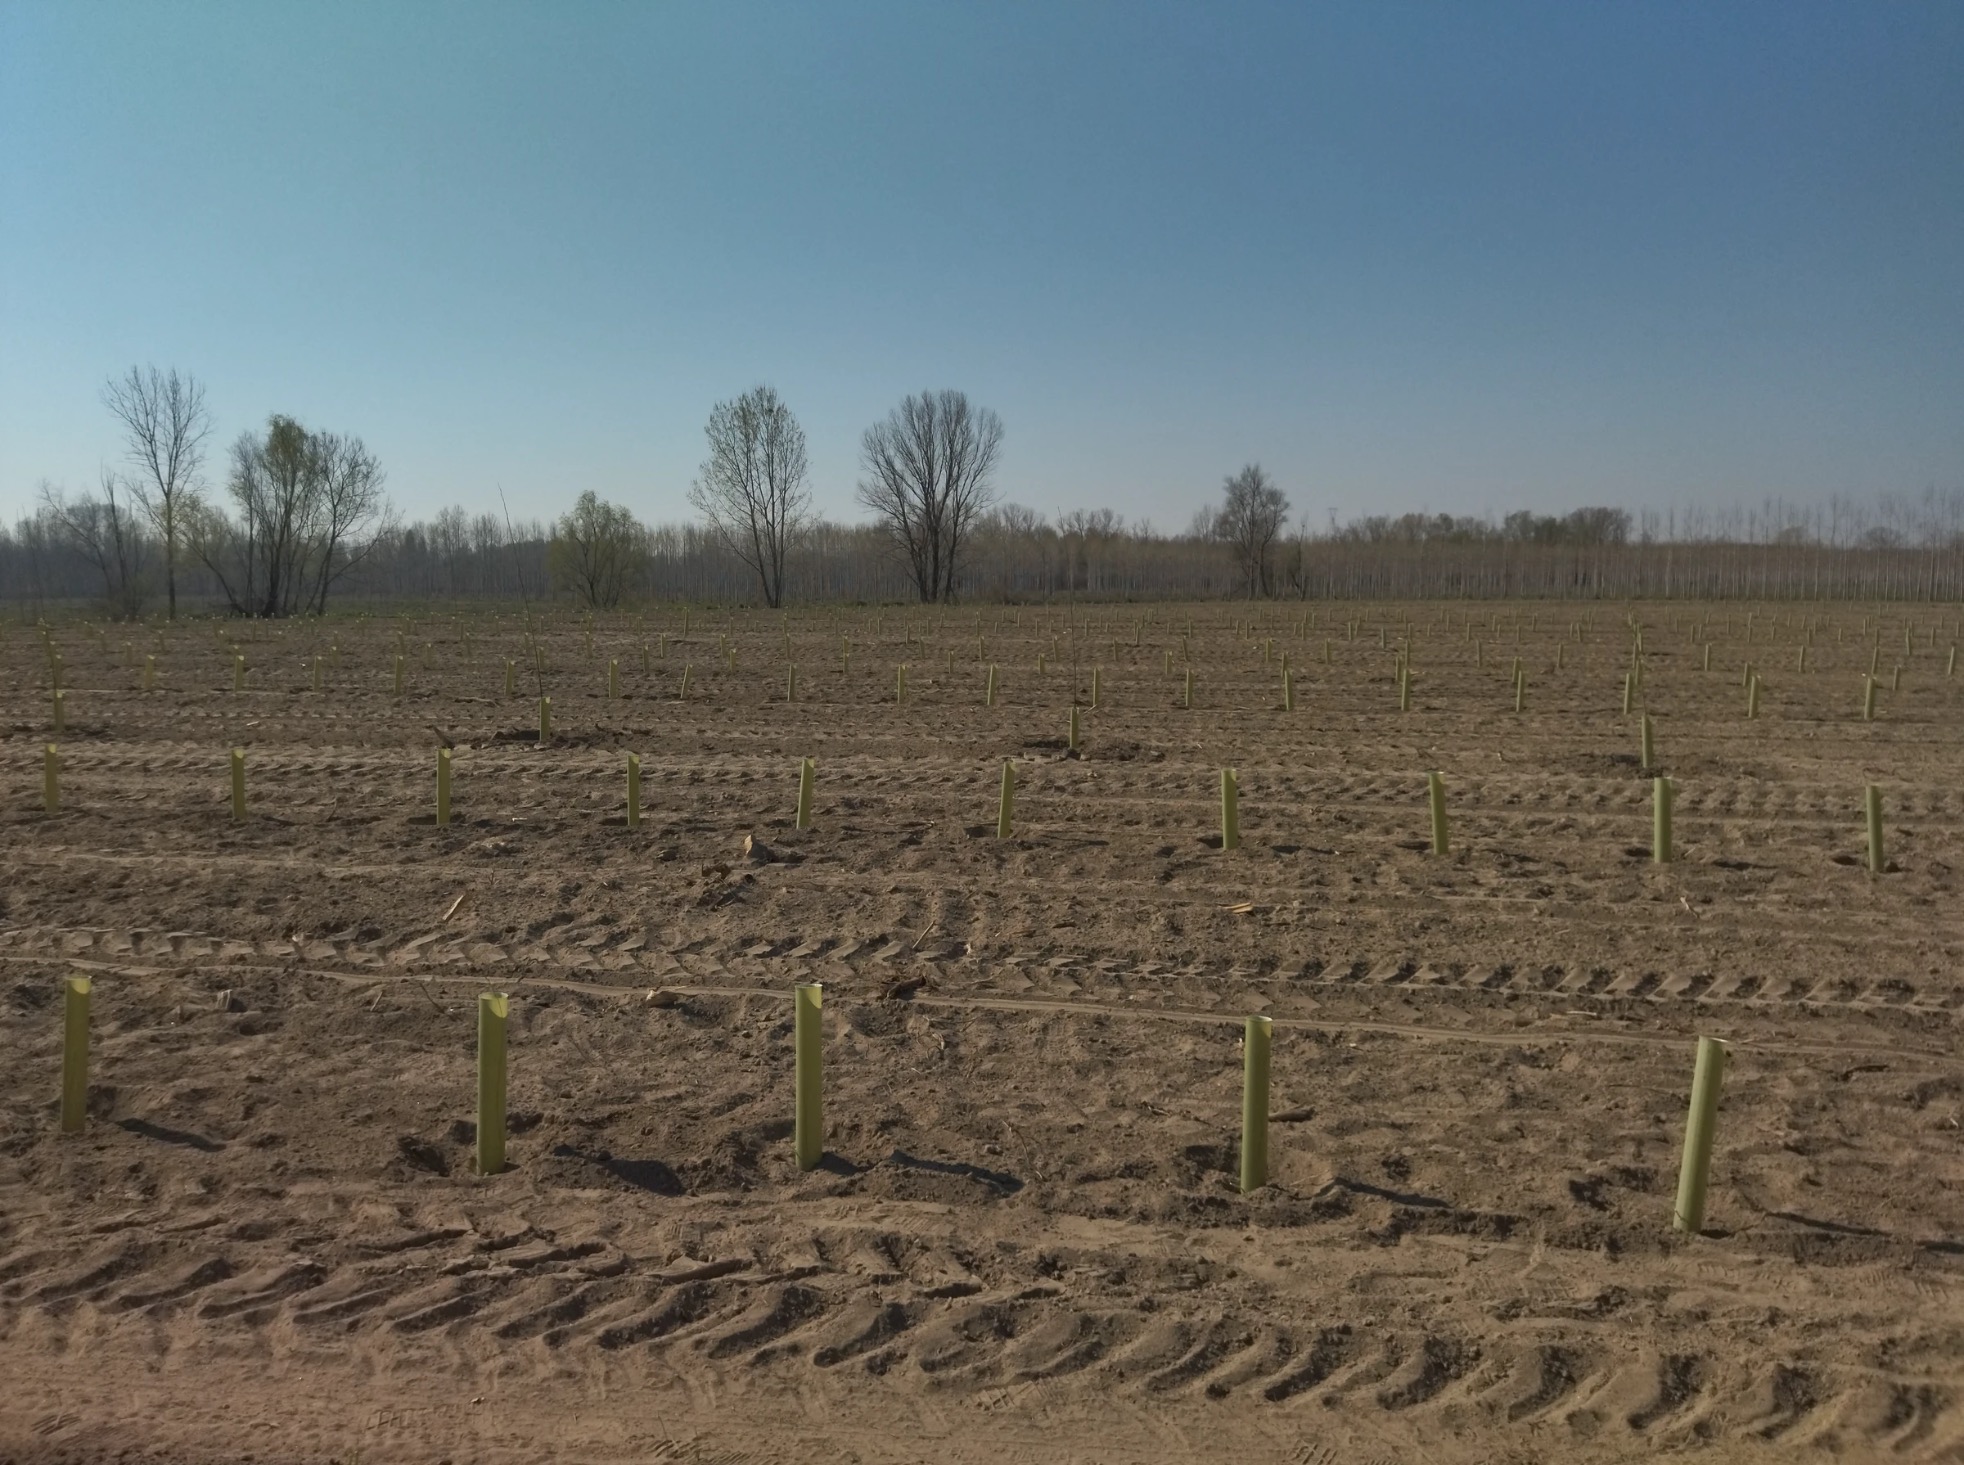 The first professional planting in Italy has been completed. More than 9000 trees planted in 7 hectares. The AlberItalia team designed a multifunctional polycyclic planting that aims to create a more orderly future riverside Woodland. Among the species planted we highlight Sessile oak (Quercus robur), White poplar (Populus alba), Alder (Alnus glutinosa) or European black elderberry (Sambucus nigra). The planting area is within the Natura 2000 network, and this reforestation will undoubtedly bring great ecological value to the area, reducing erosion on the riversides and supporting the local fauna. More details ?